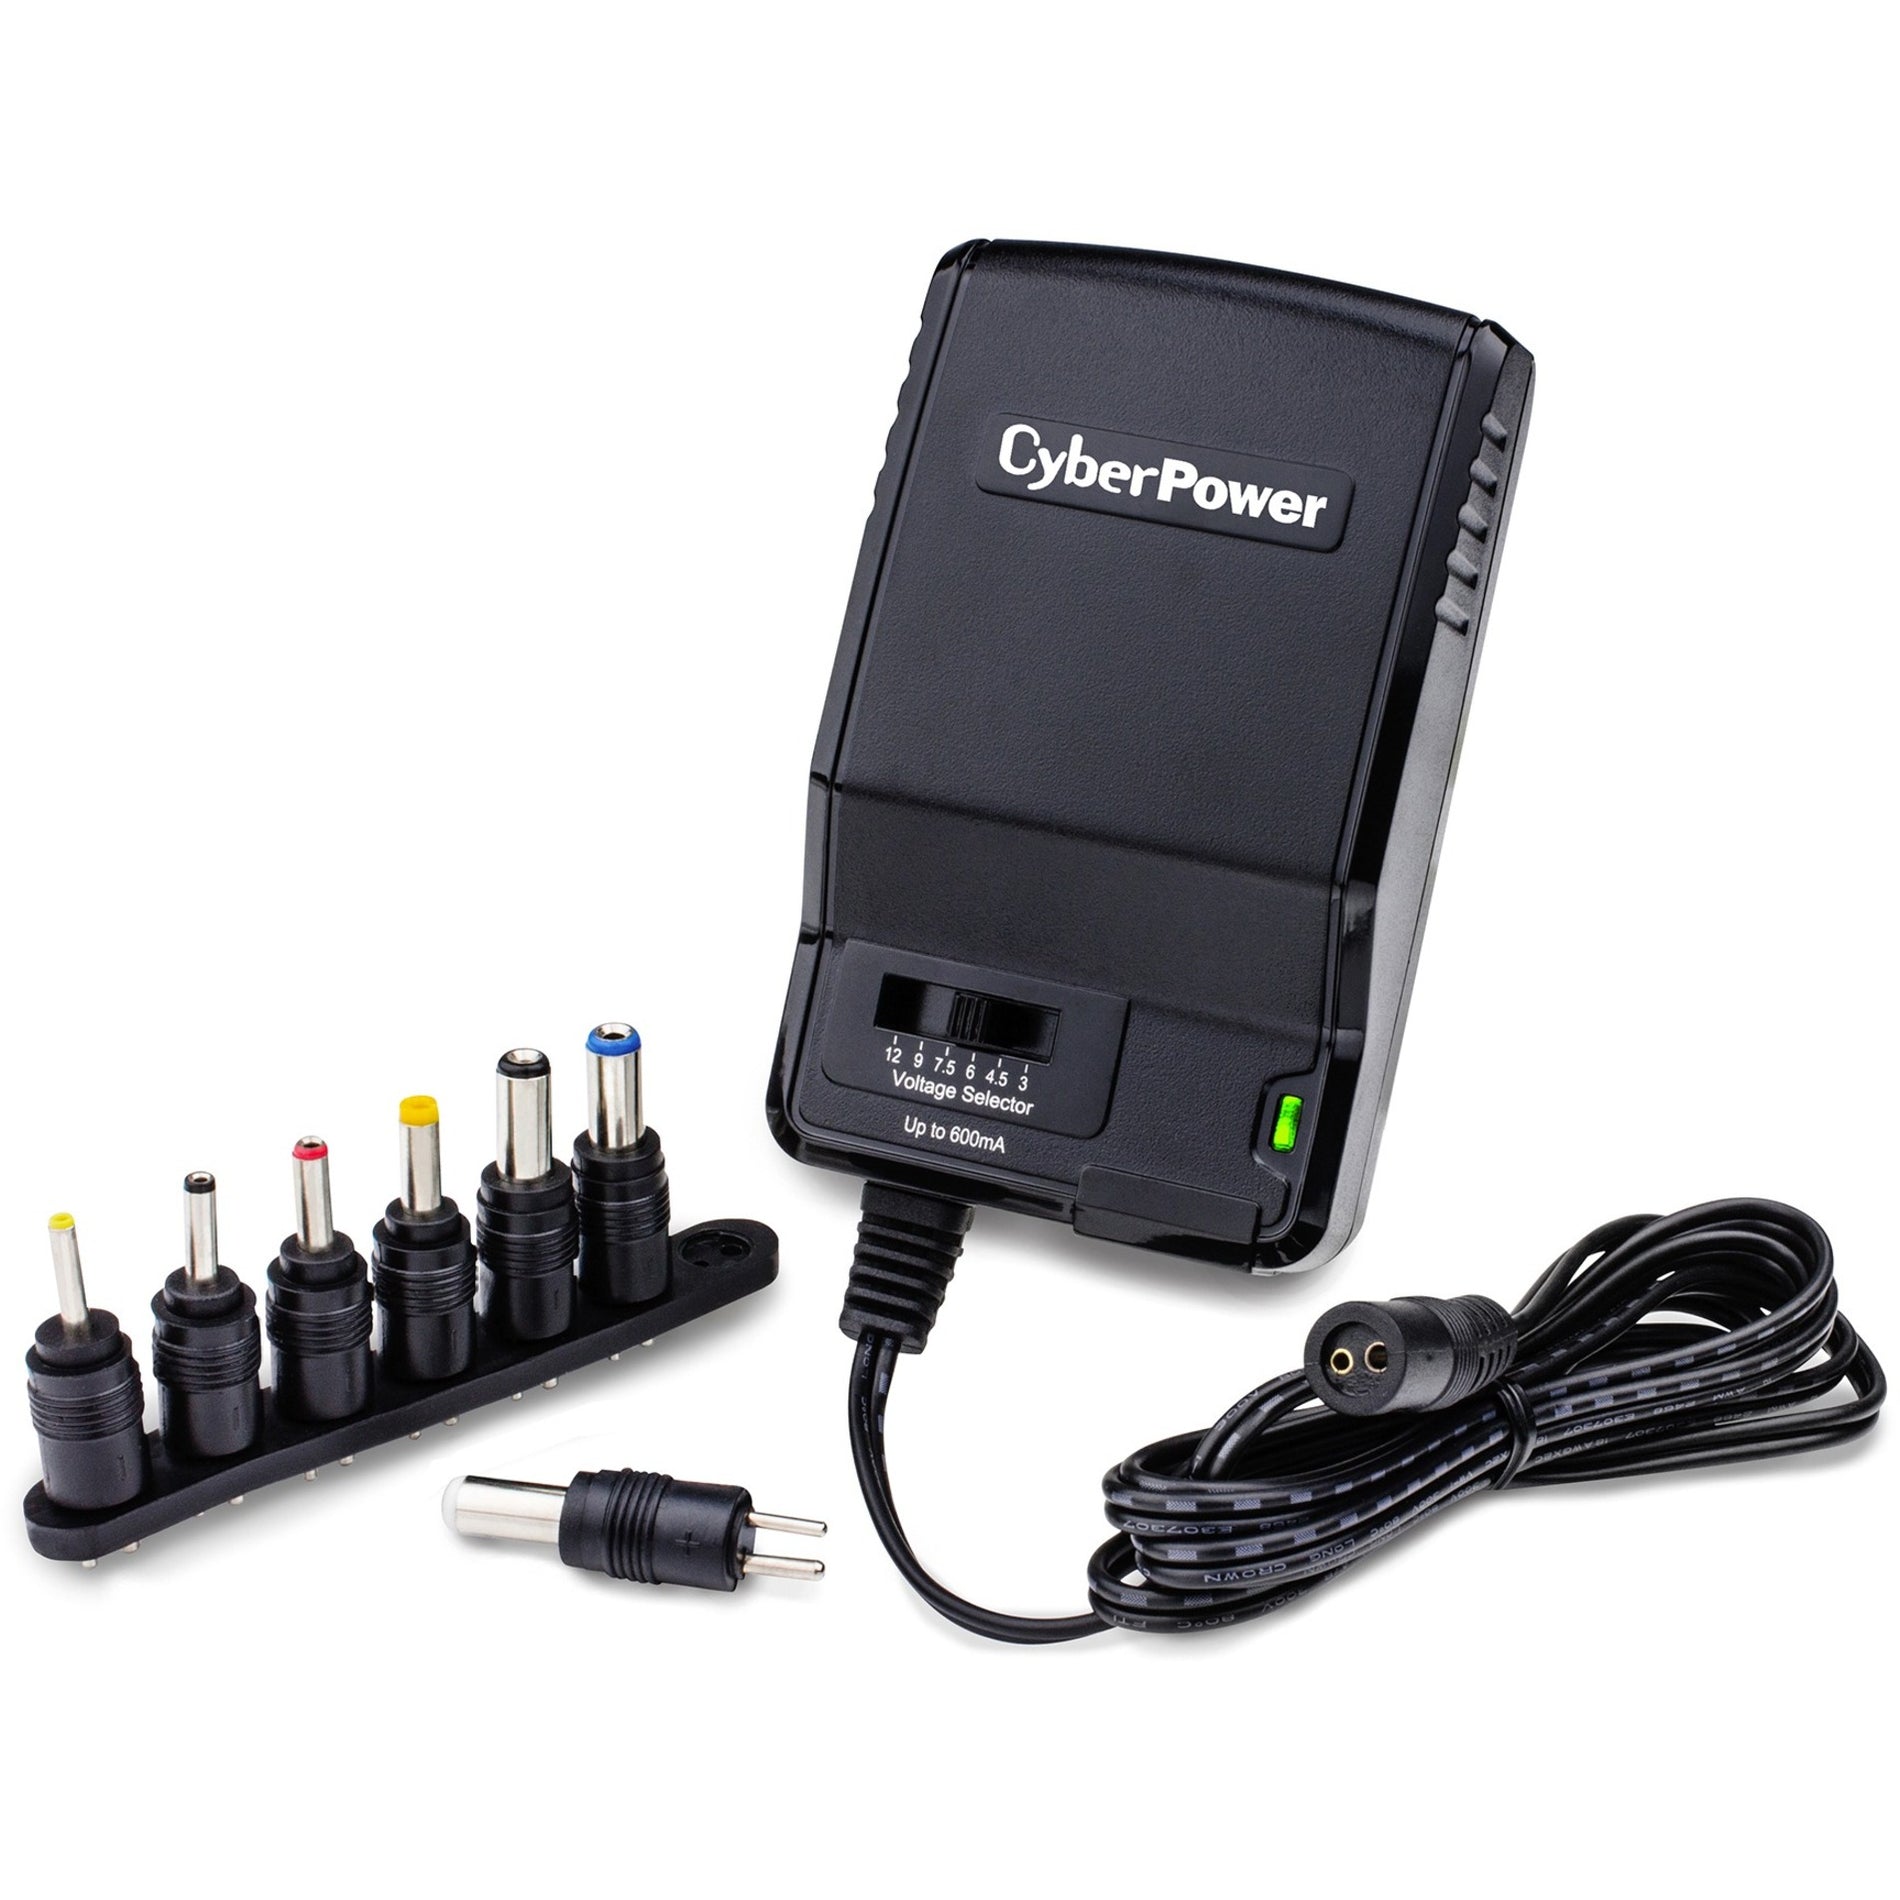 CyberPower CPUAC600 Universal Power Adapter 3-12V 600mA and AC Power Plug, Multiple Tips, Slim Line Design